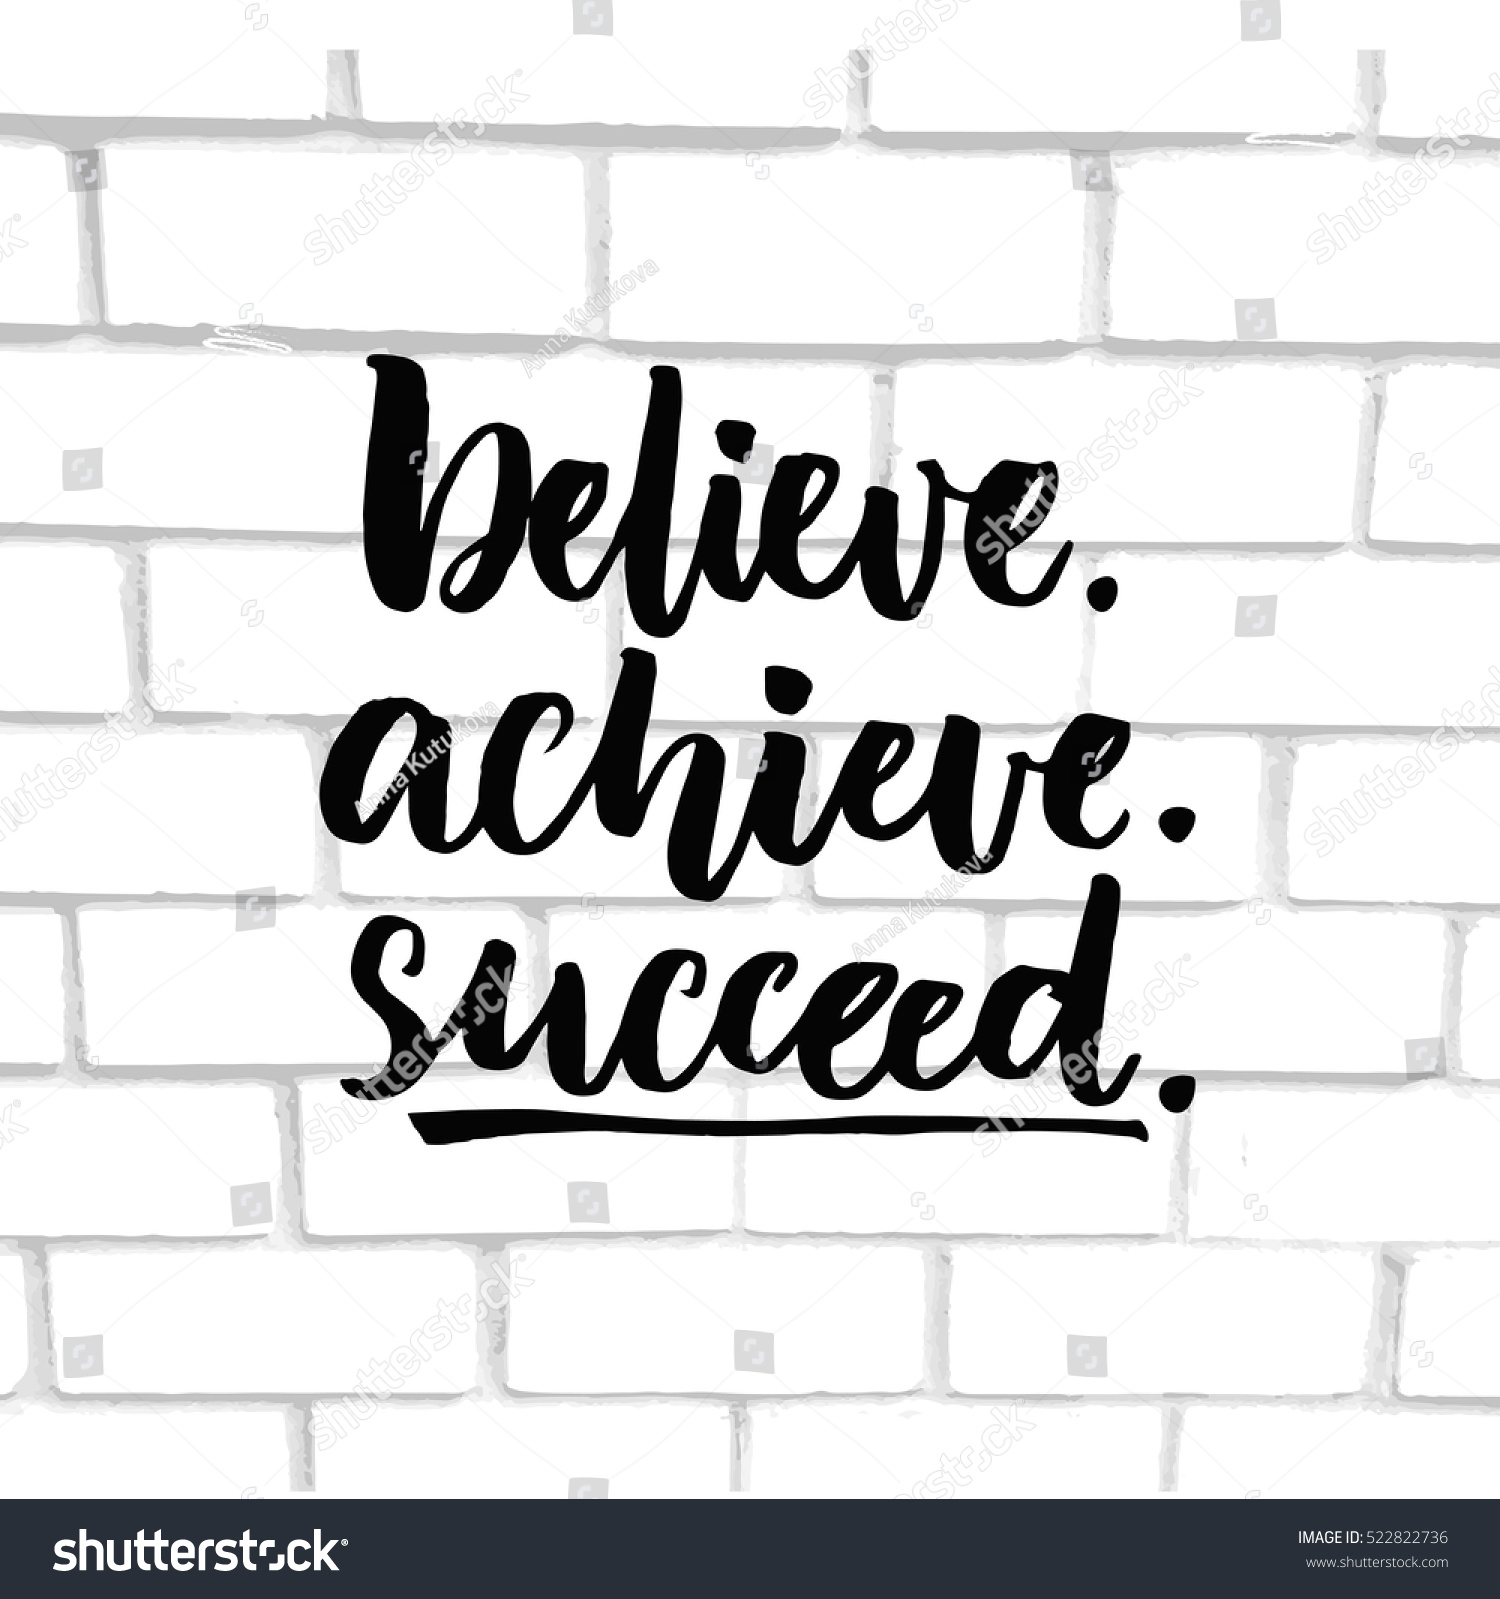 Download Believe Achieve Succeed Inspiration Vector Saying Stock ...